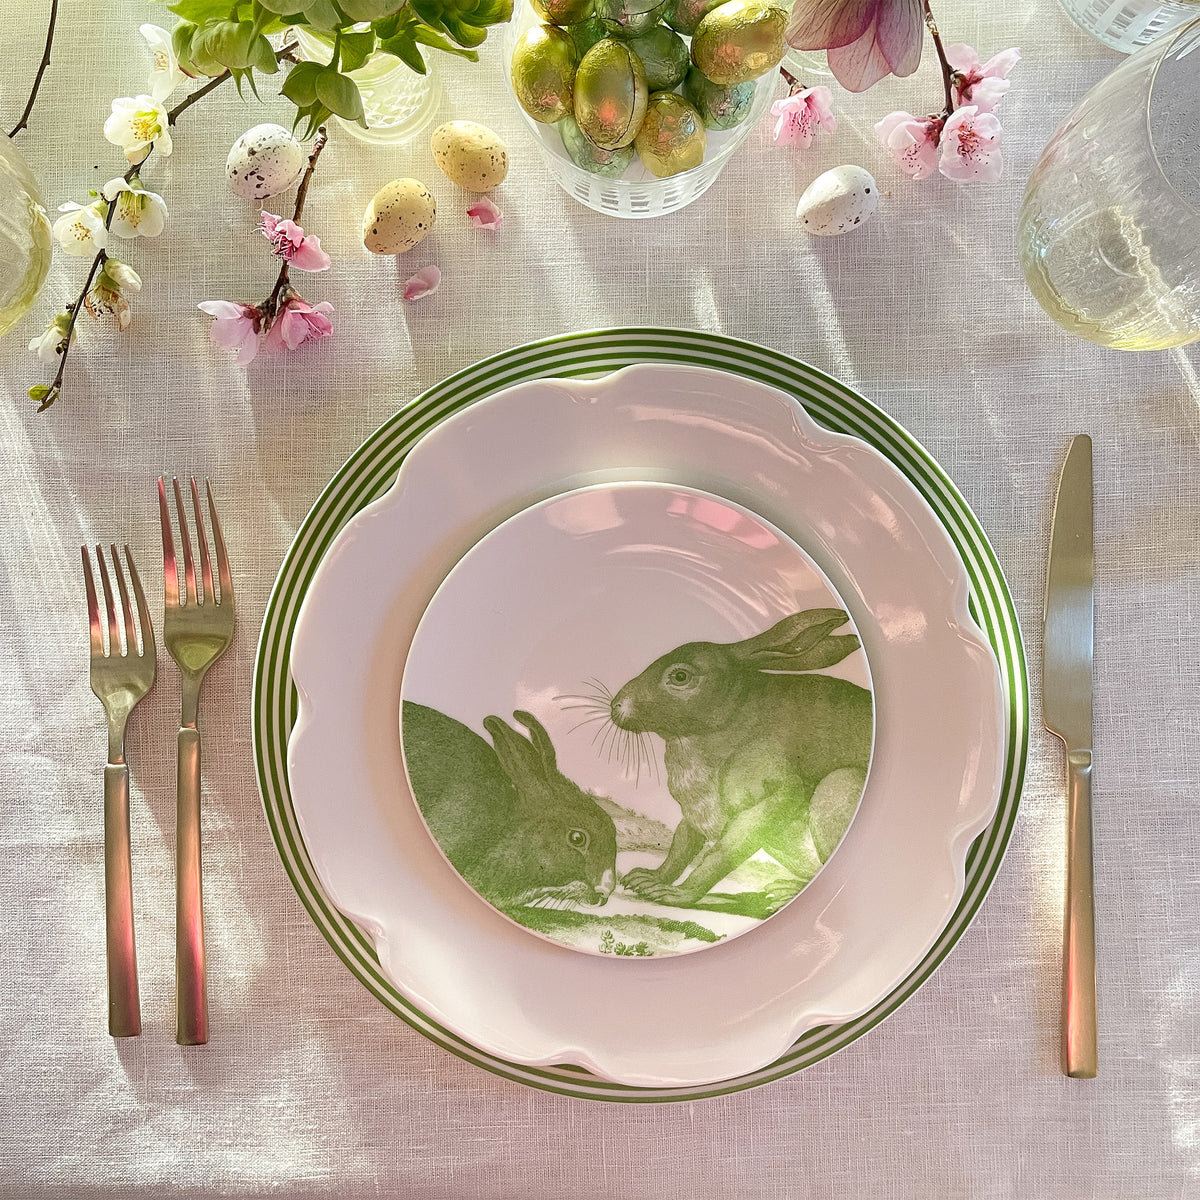 A table setting with a white plate featuring a charming bunny scene, surrounded by Caskata Bunnies Verde Small Plates and canapé plates. Silver cutlery, decorated with flowers, Easter eggs, and glasses complete the look on a white tablecloth. The high-fired porcelain adds an elegant touch to the festive arrangement.